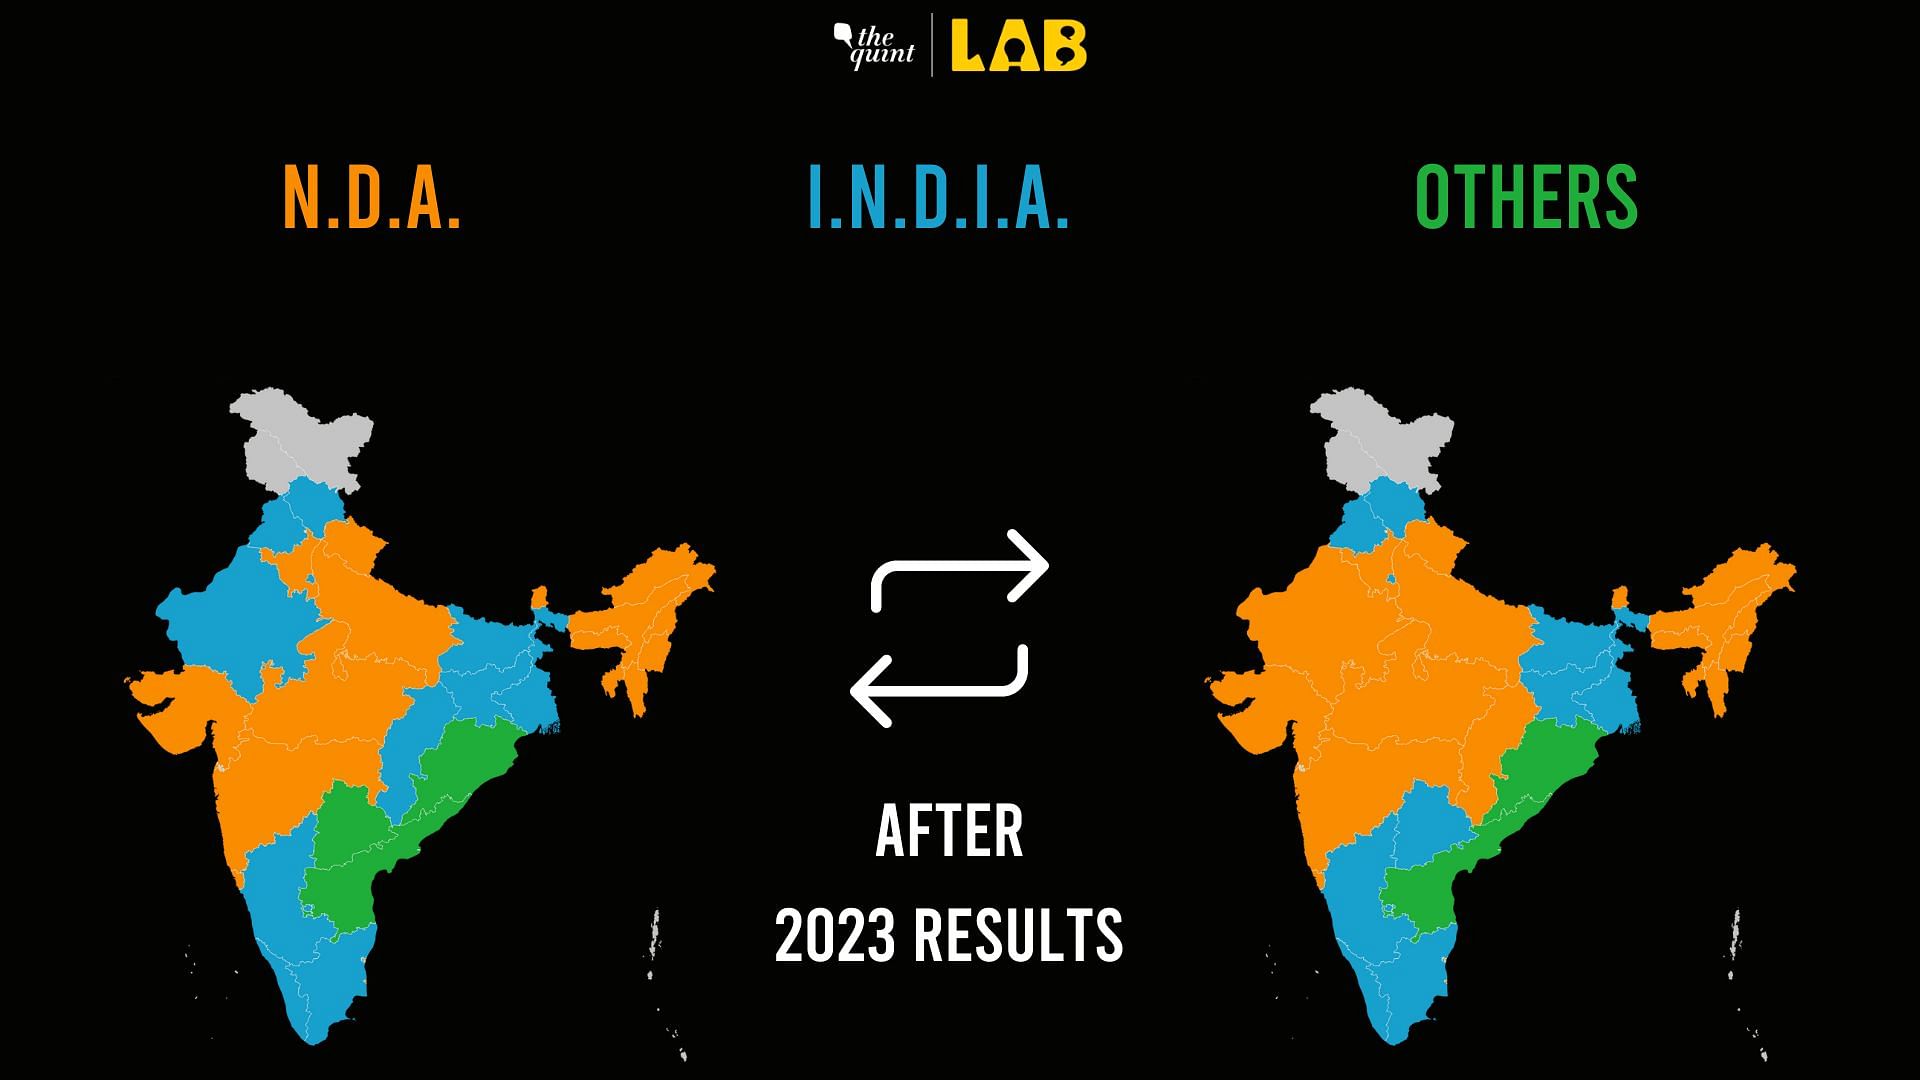 After Election Results 2023, Which Alliance Has More States NDA or INDIA